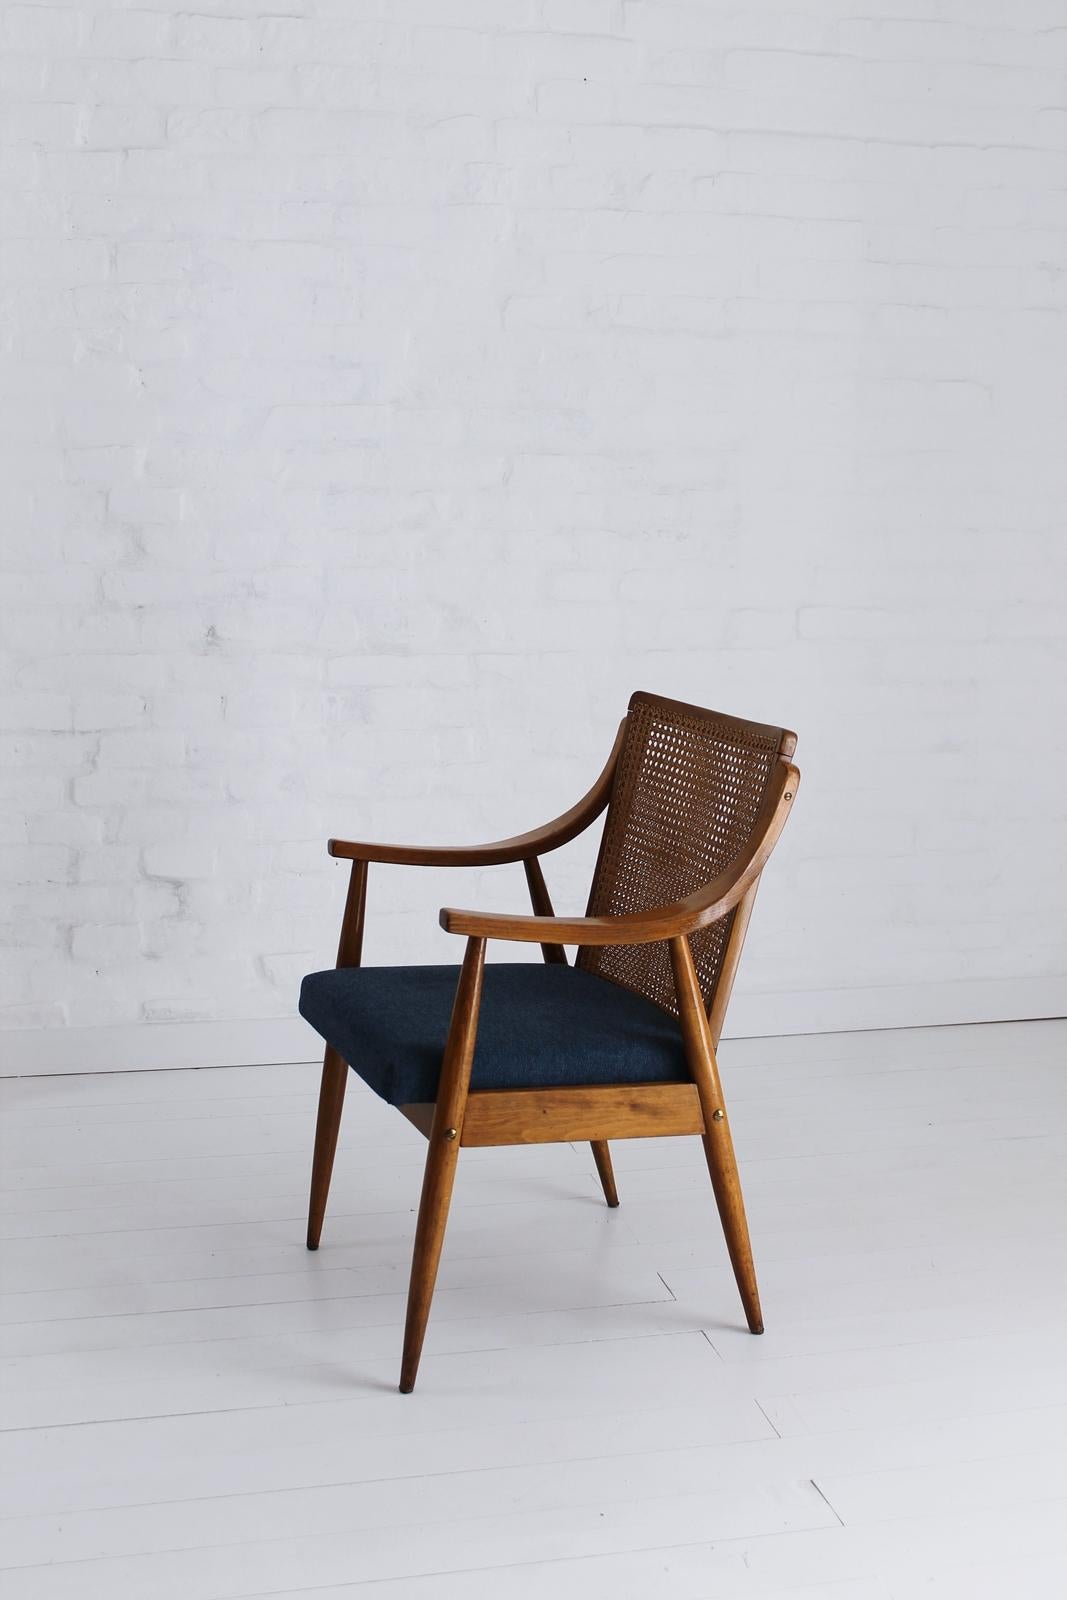 Rare Mid-Century Modern Hungarian armchair in style of Peter Hvidt and Orla Mølgaard-Nielsen, in very good condition.
This chair in beechwood with caned back is newly upholstered with a denim blue fabric.